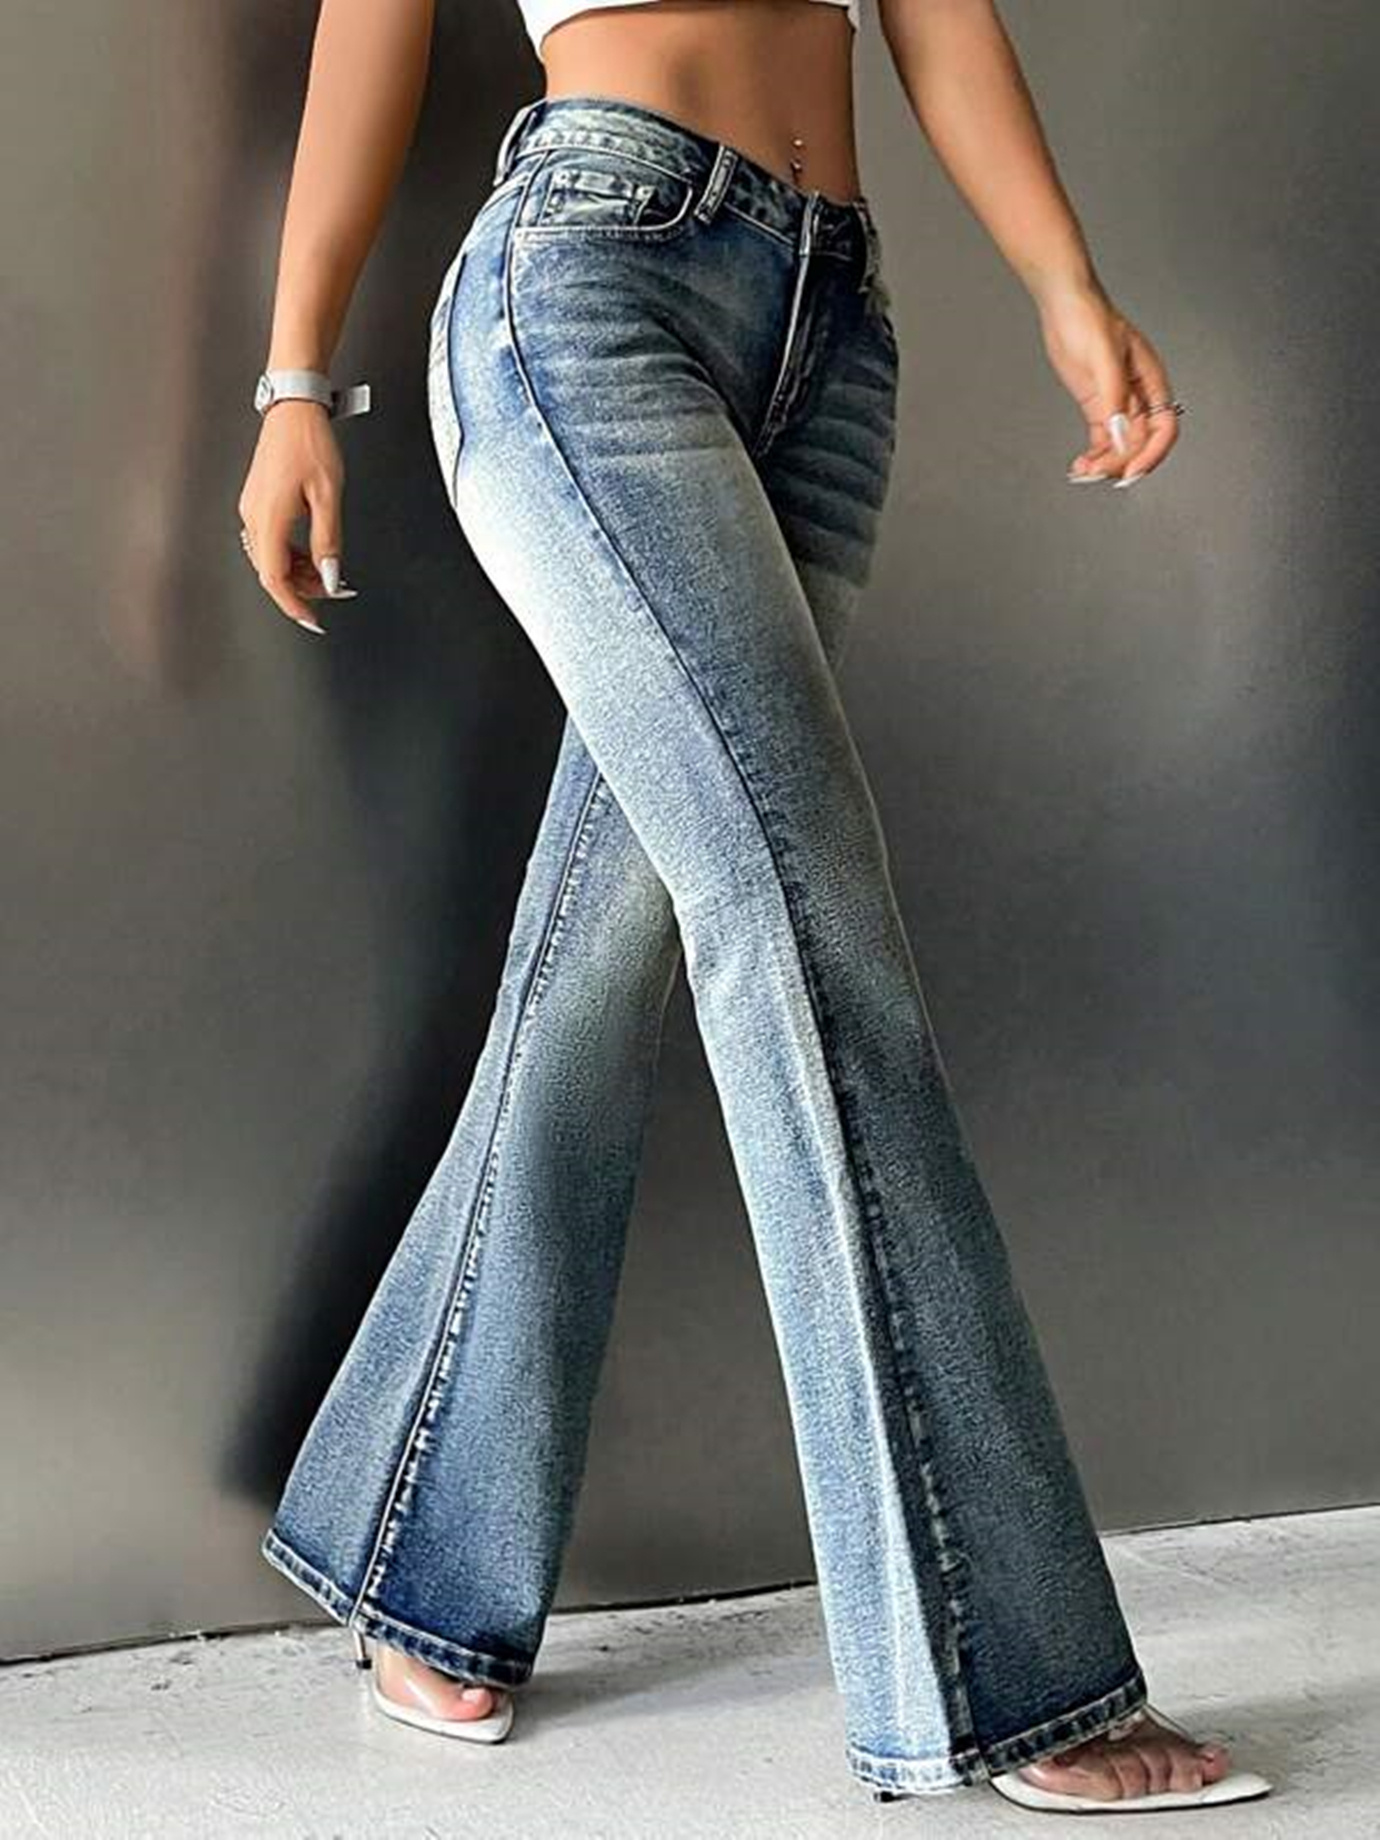 Women's Flared & Bootcut Jeans, 70s Style